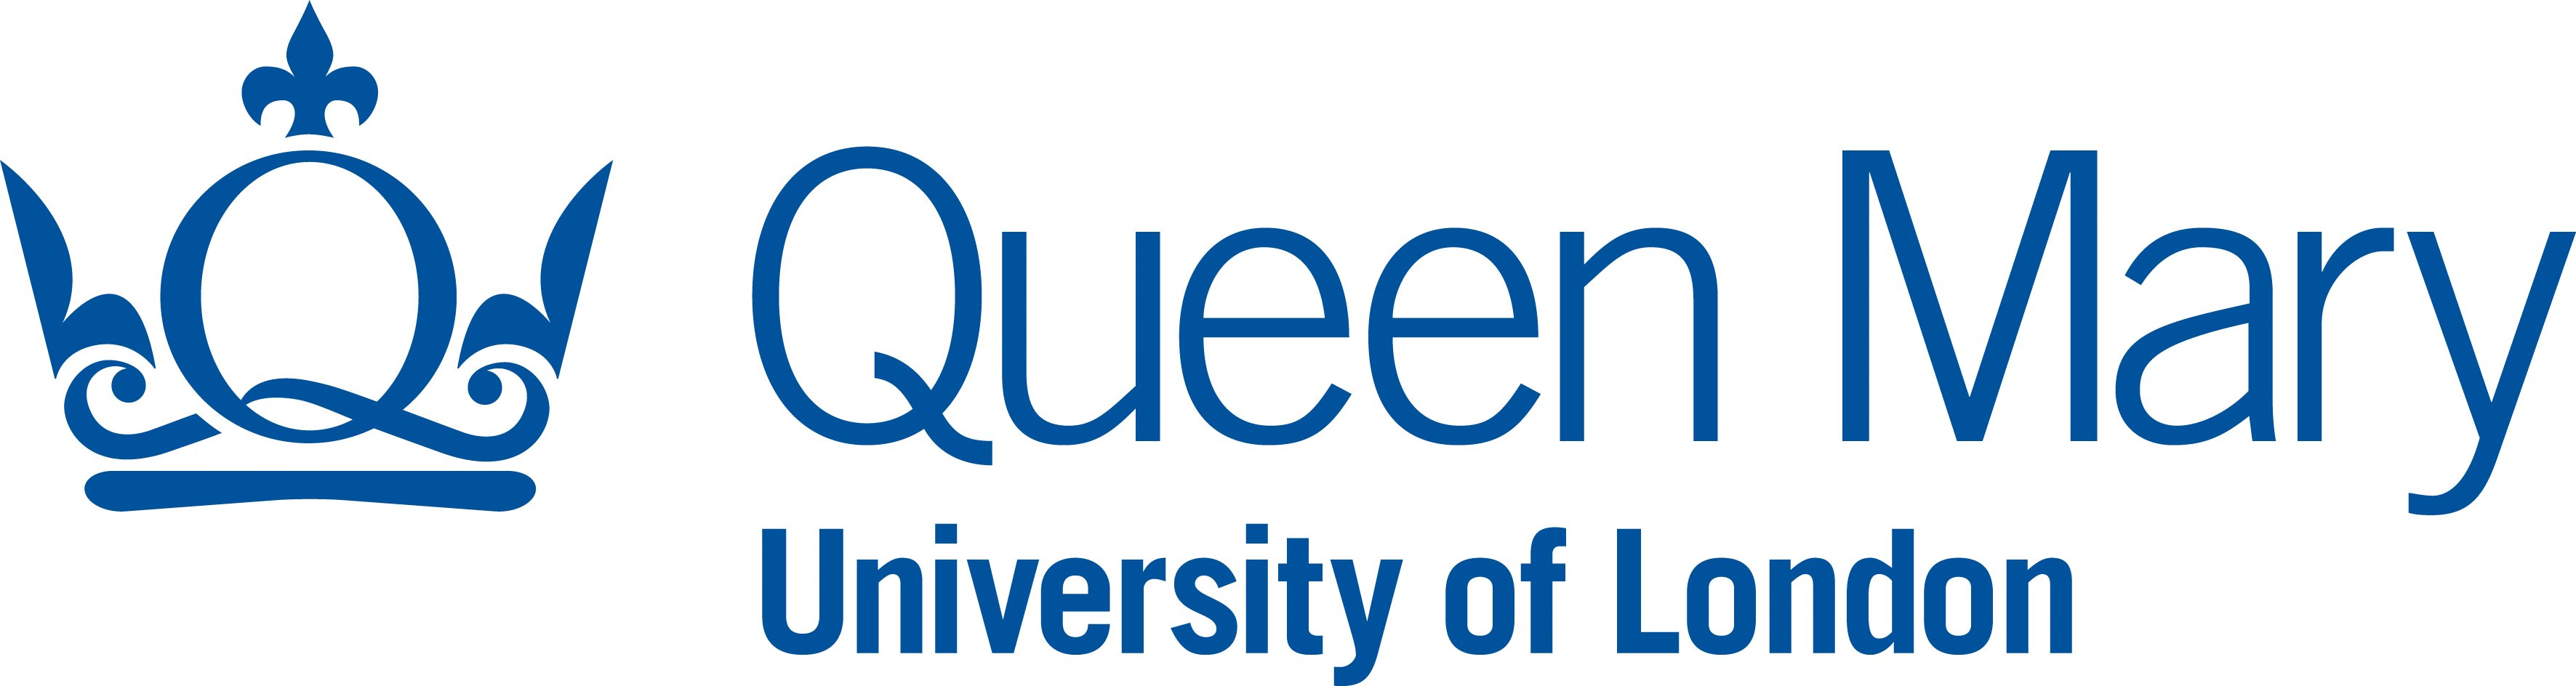 Queen Mary University (Banking & Finance)